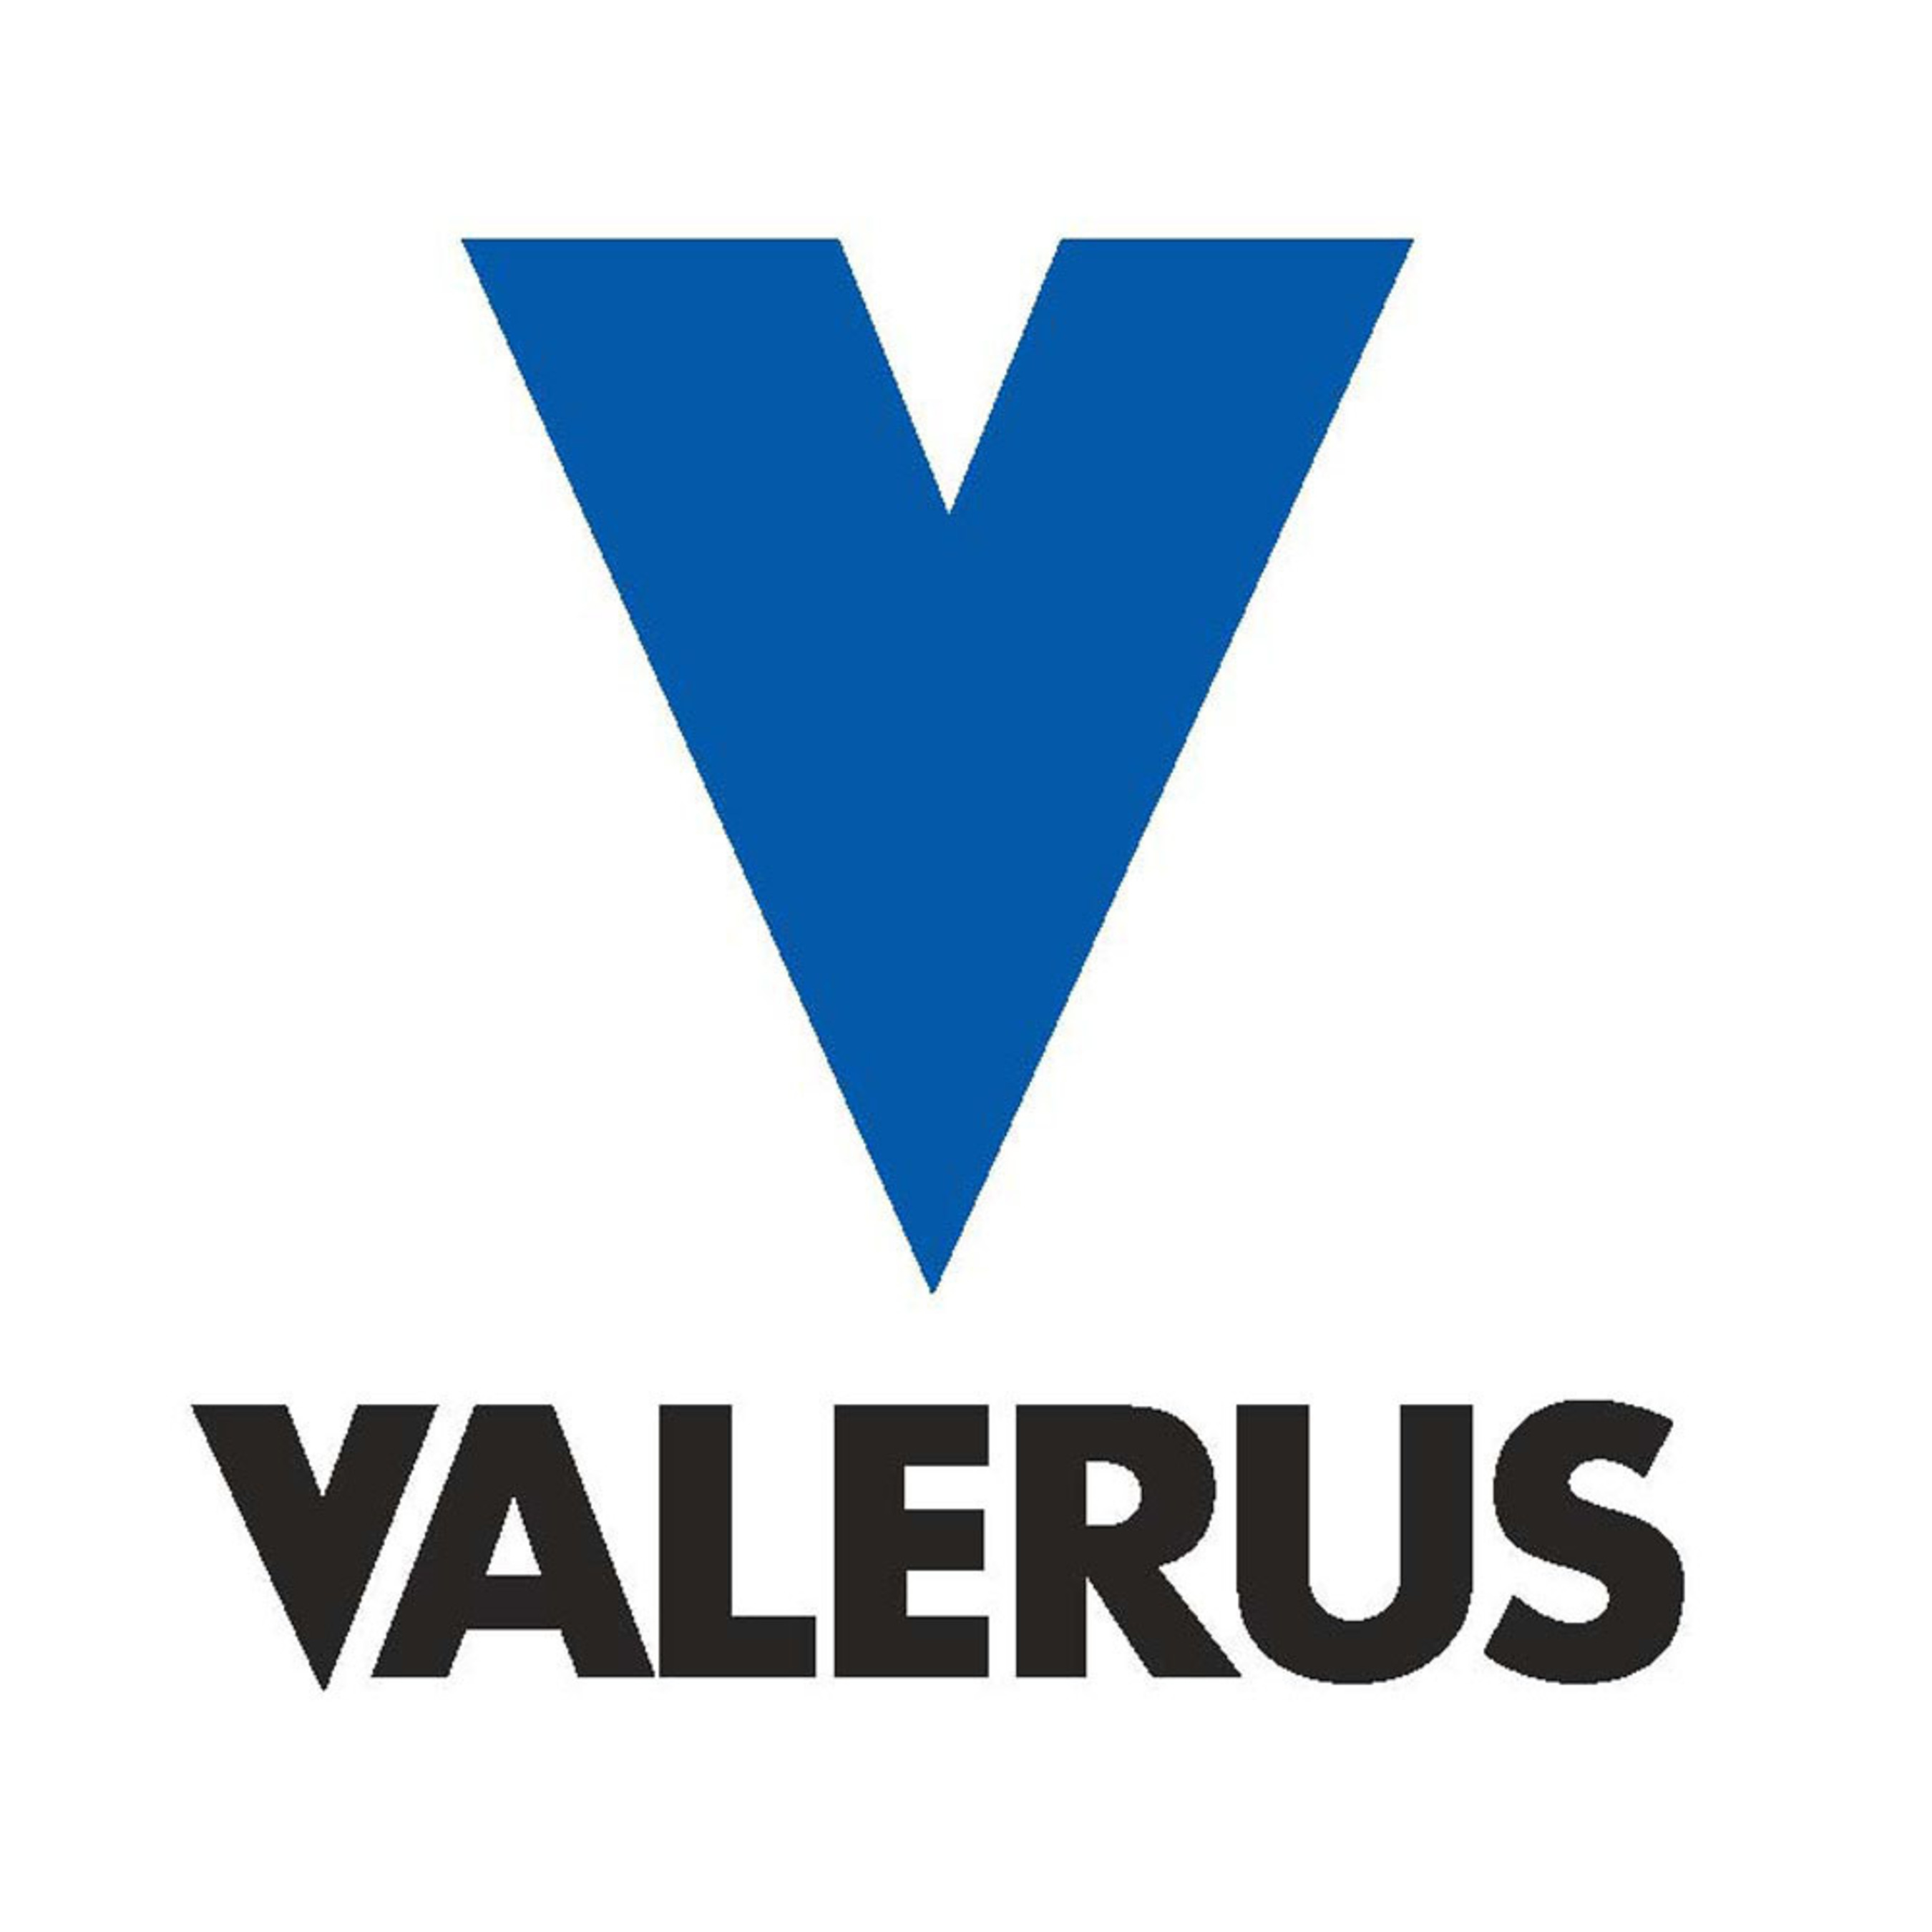 Valerus is a worldwide leader in integrated oil and gas handling and processing. (PRNewsFoto/Valerus) (PRNewsFoto/VALERUS)